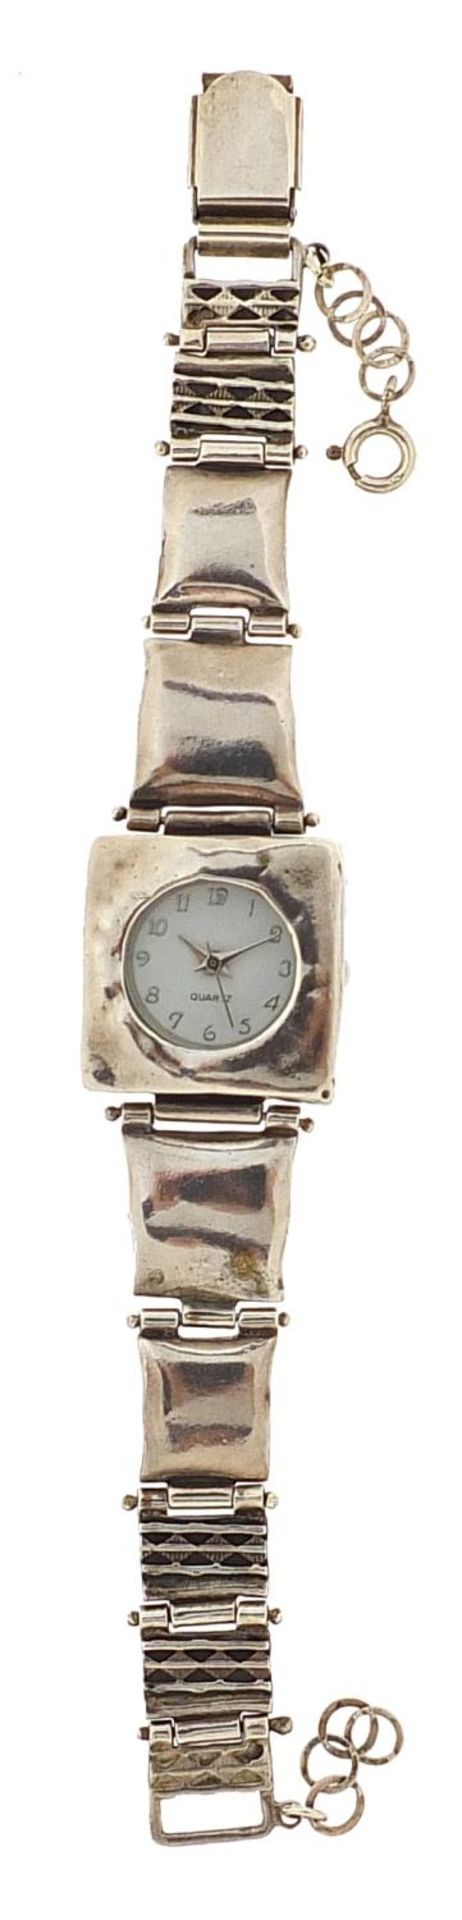 Ladies silver wristwatch, the case engraved Dior, 24mm wide, 28.8g - Image 2 of 7